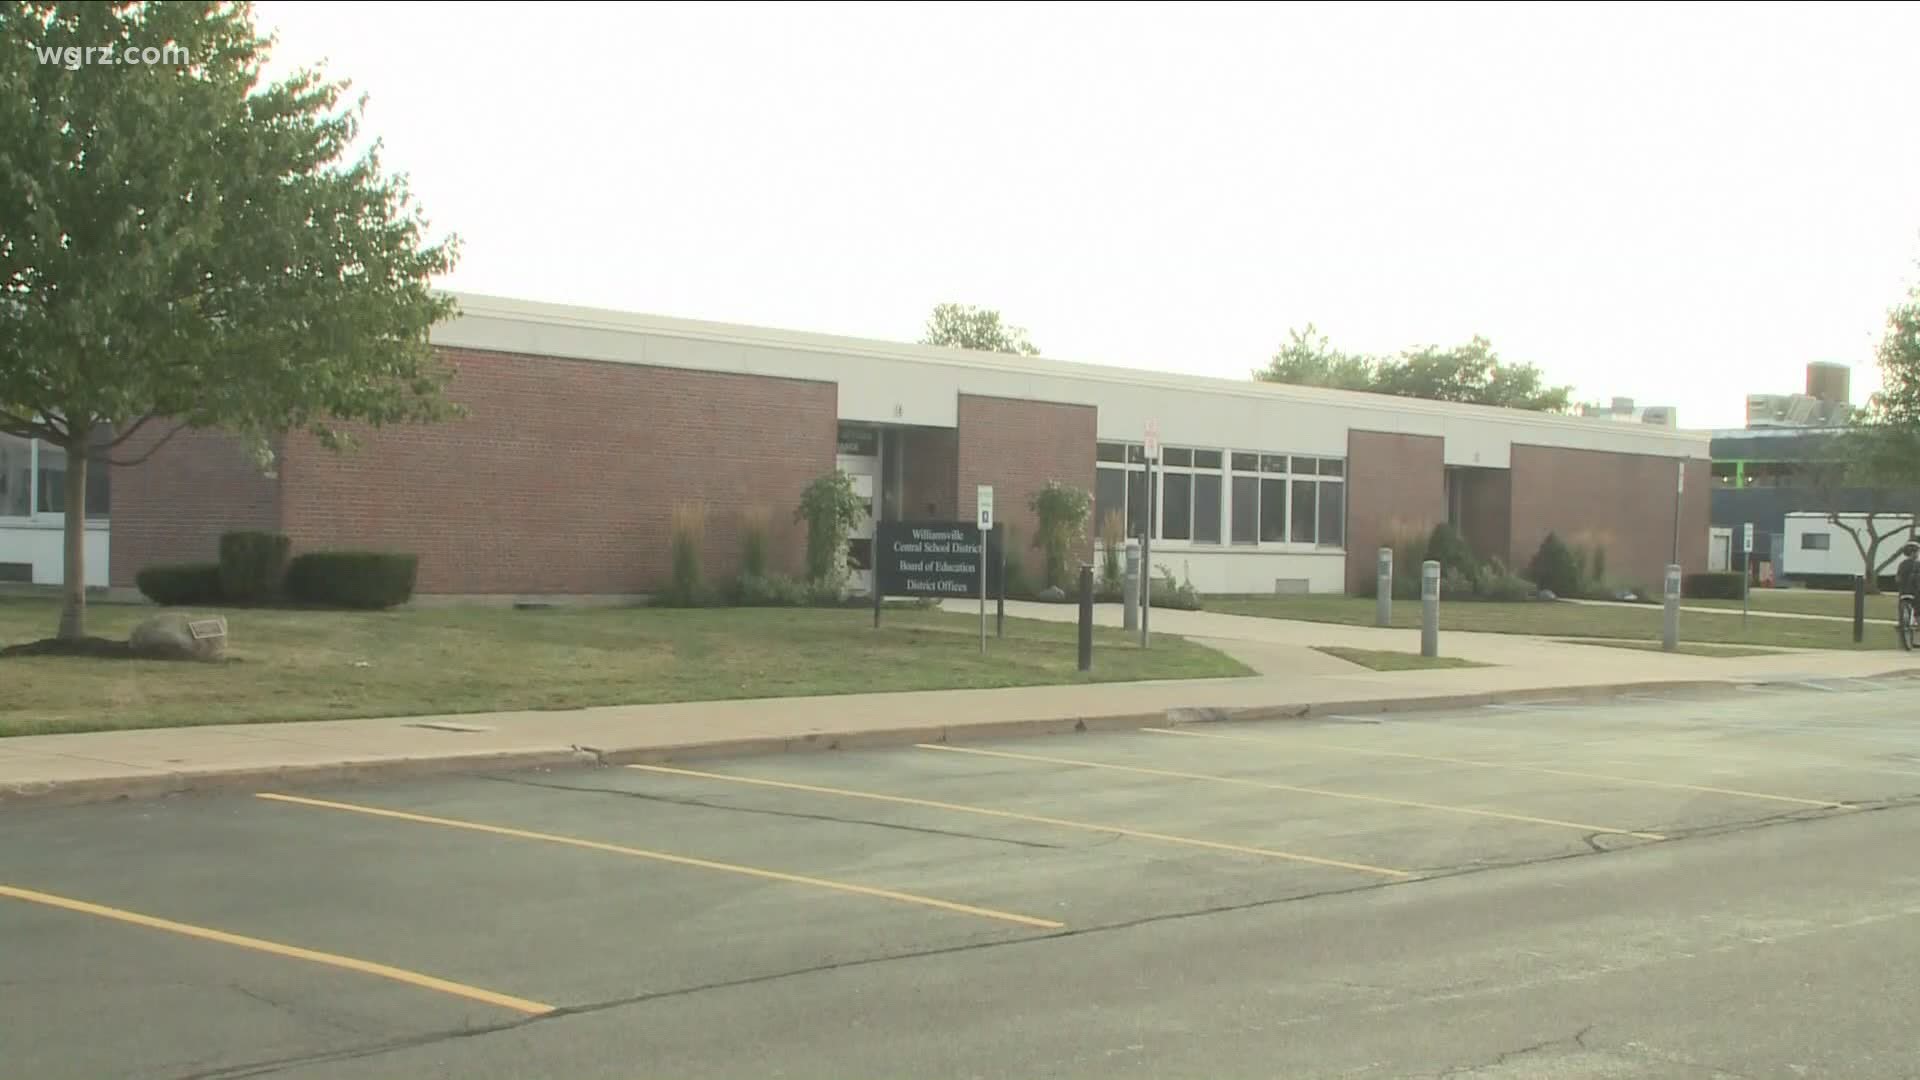 Those teachers say that they quit other jobs to take the teaching jobs within the Williamsville Central School District.